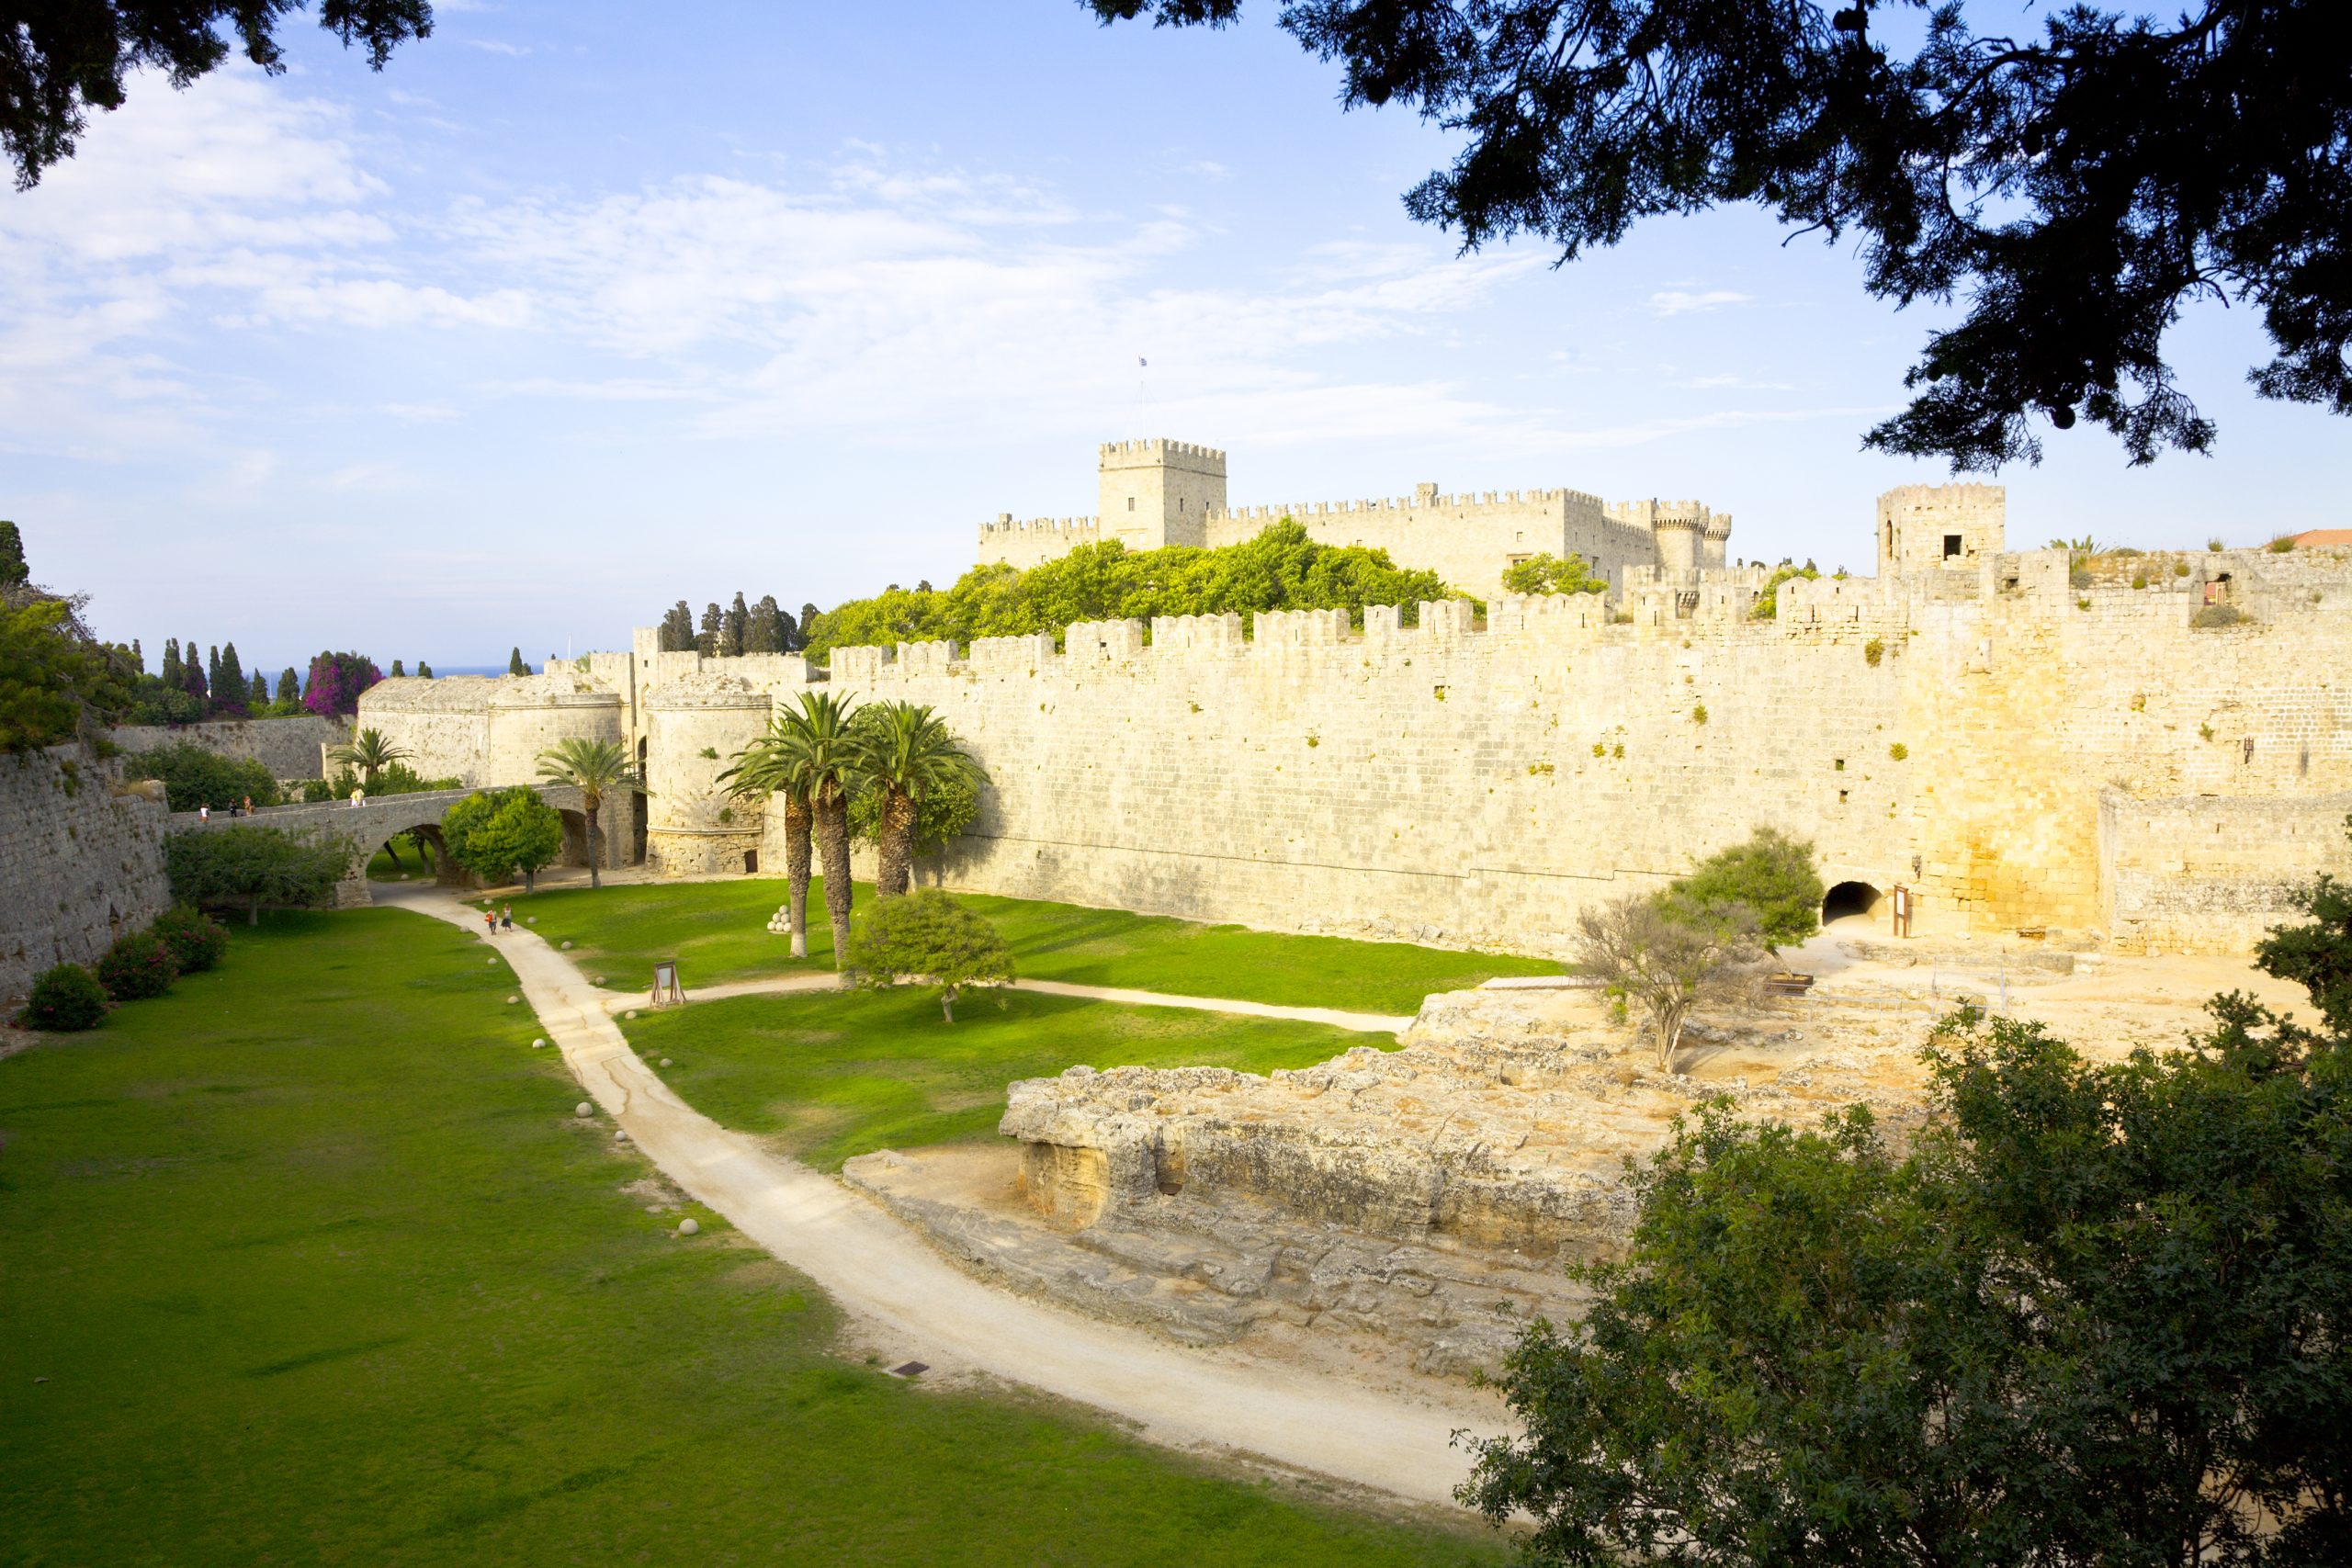 One Day in Rhodes, Greece: Visiting the Palace of the Grand Master